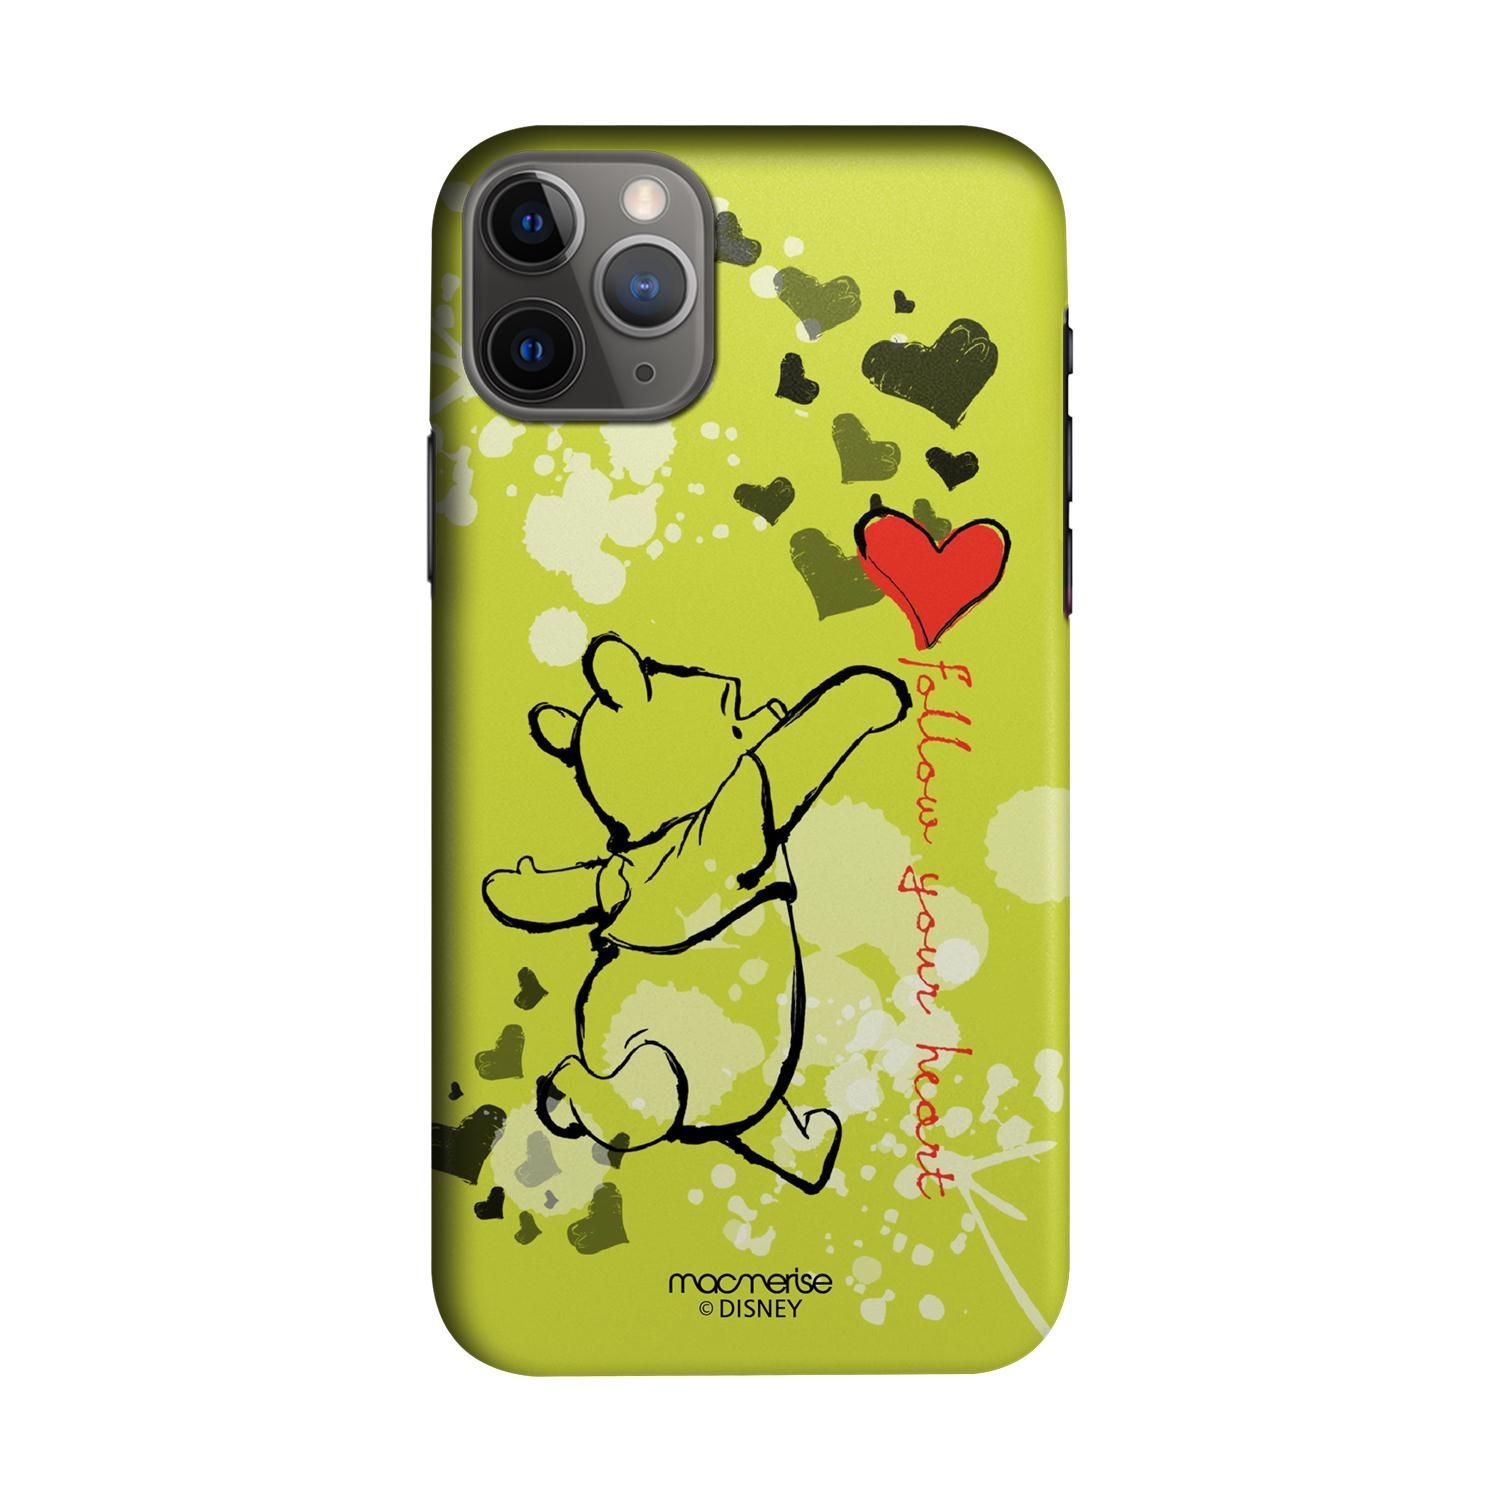 Follow your Heart - Sleek Phone Case for iPhone 11 Pro Max